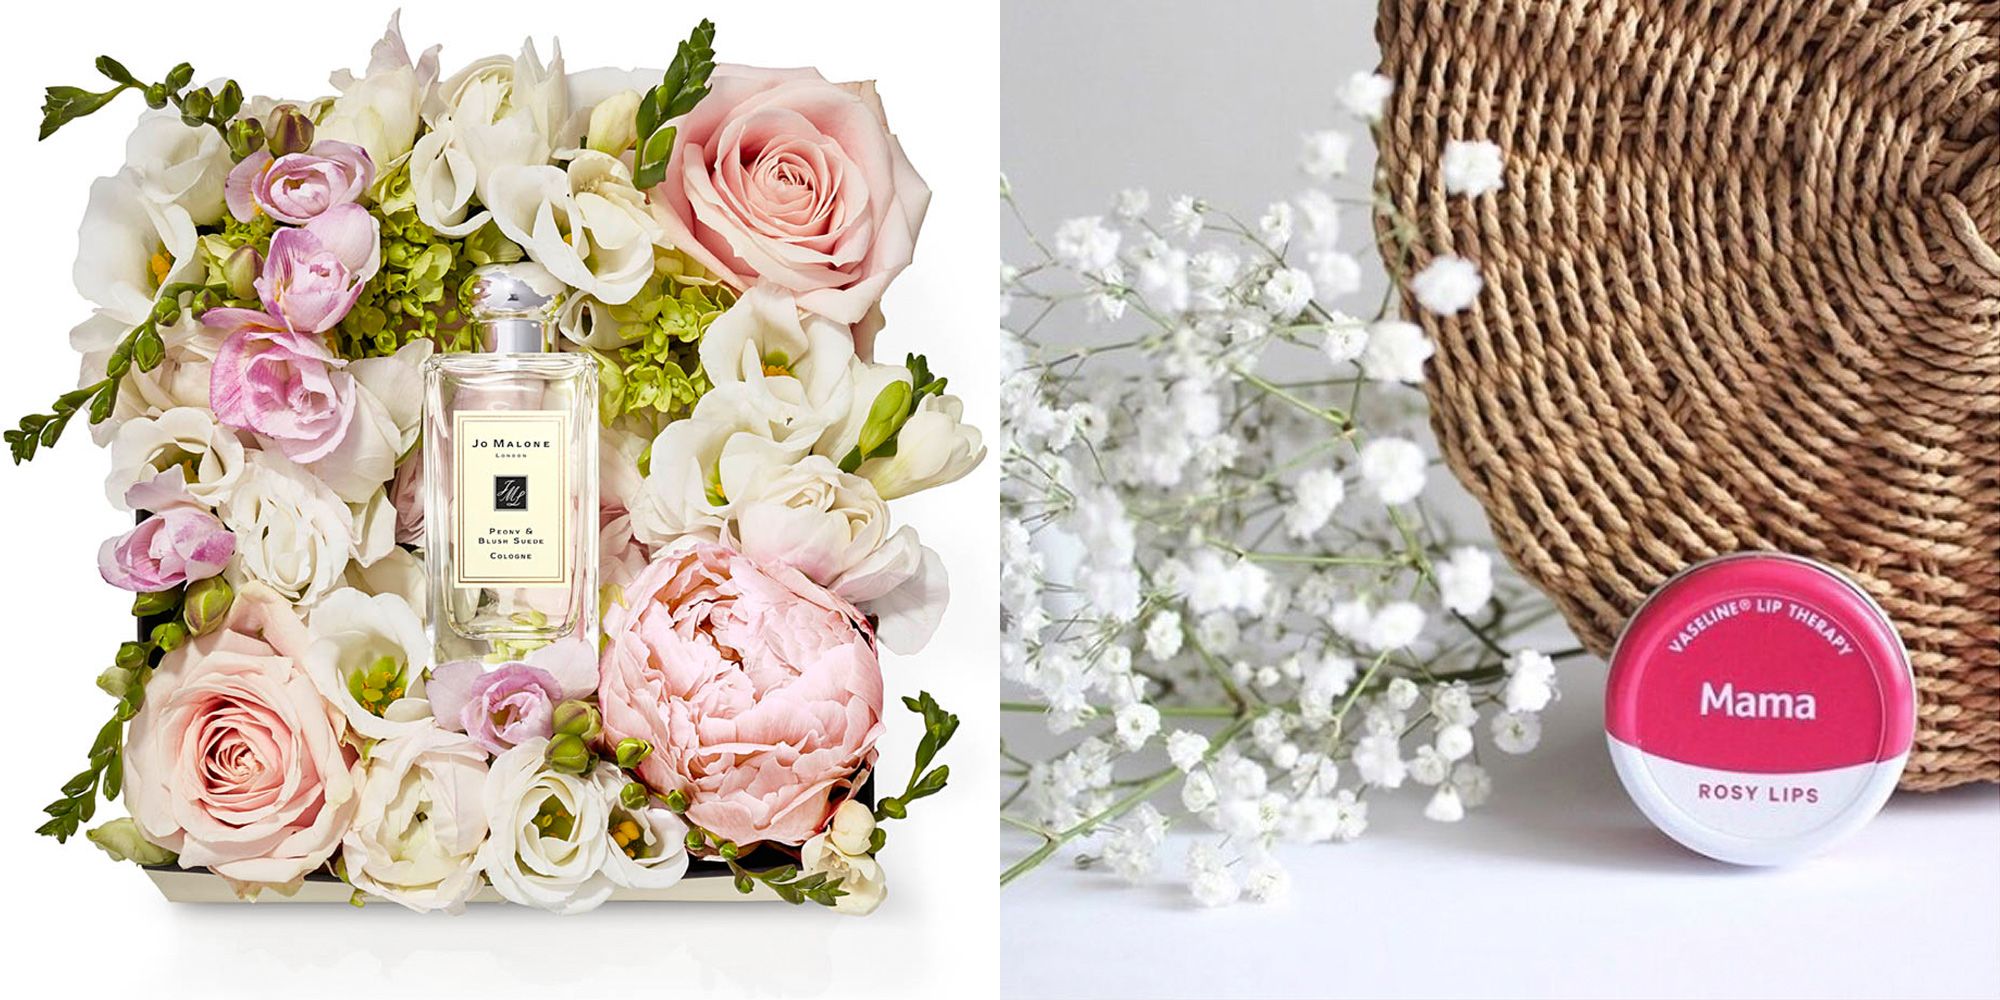 10 Last Minute Ideas for Motherâ€™s Day Gifts - My Site